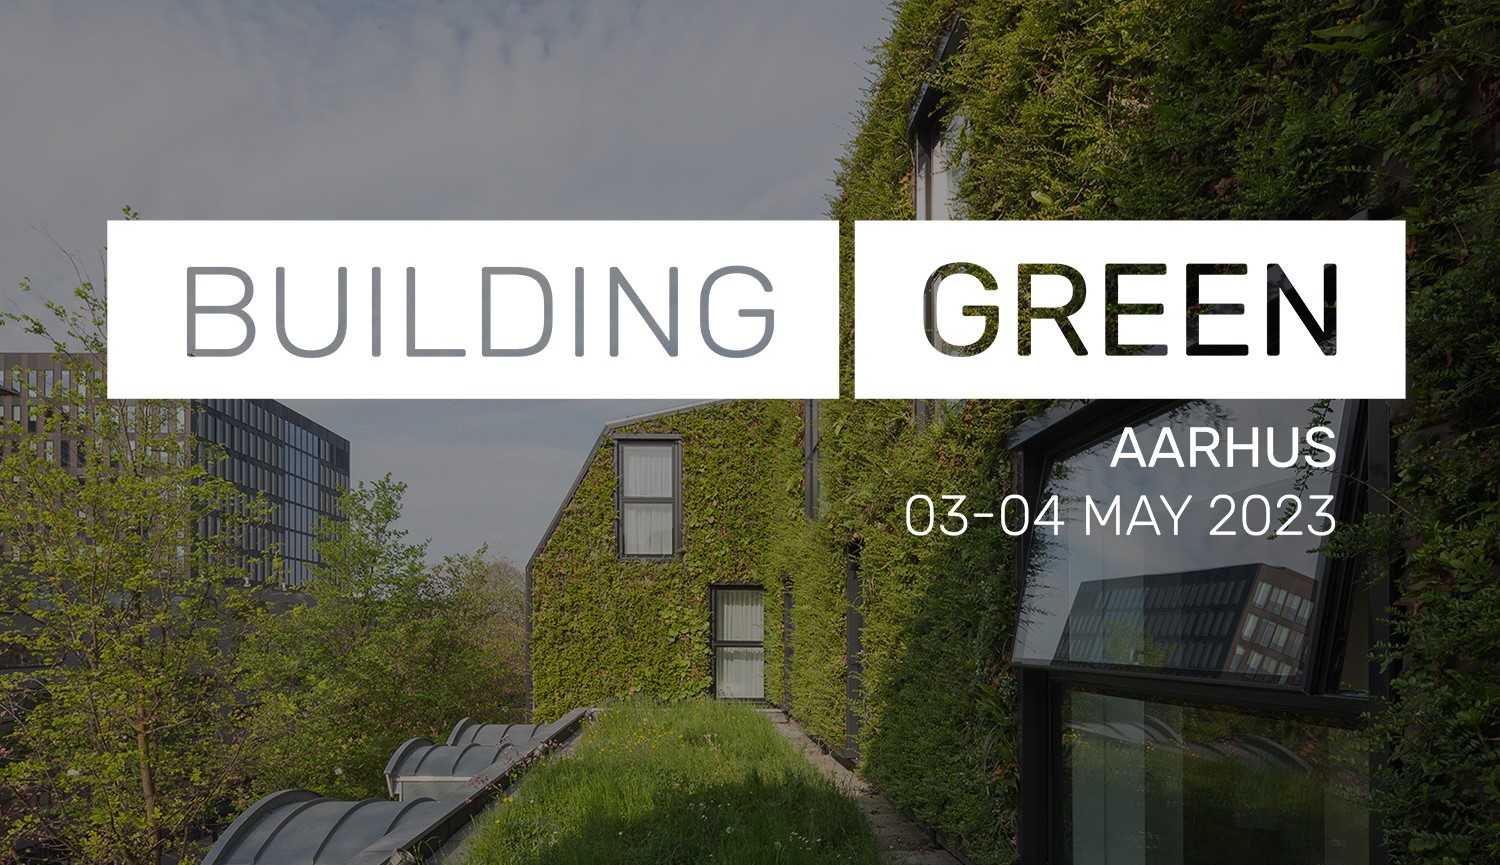 Visit Building Green Aarhus on 3 and 4 May 2023